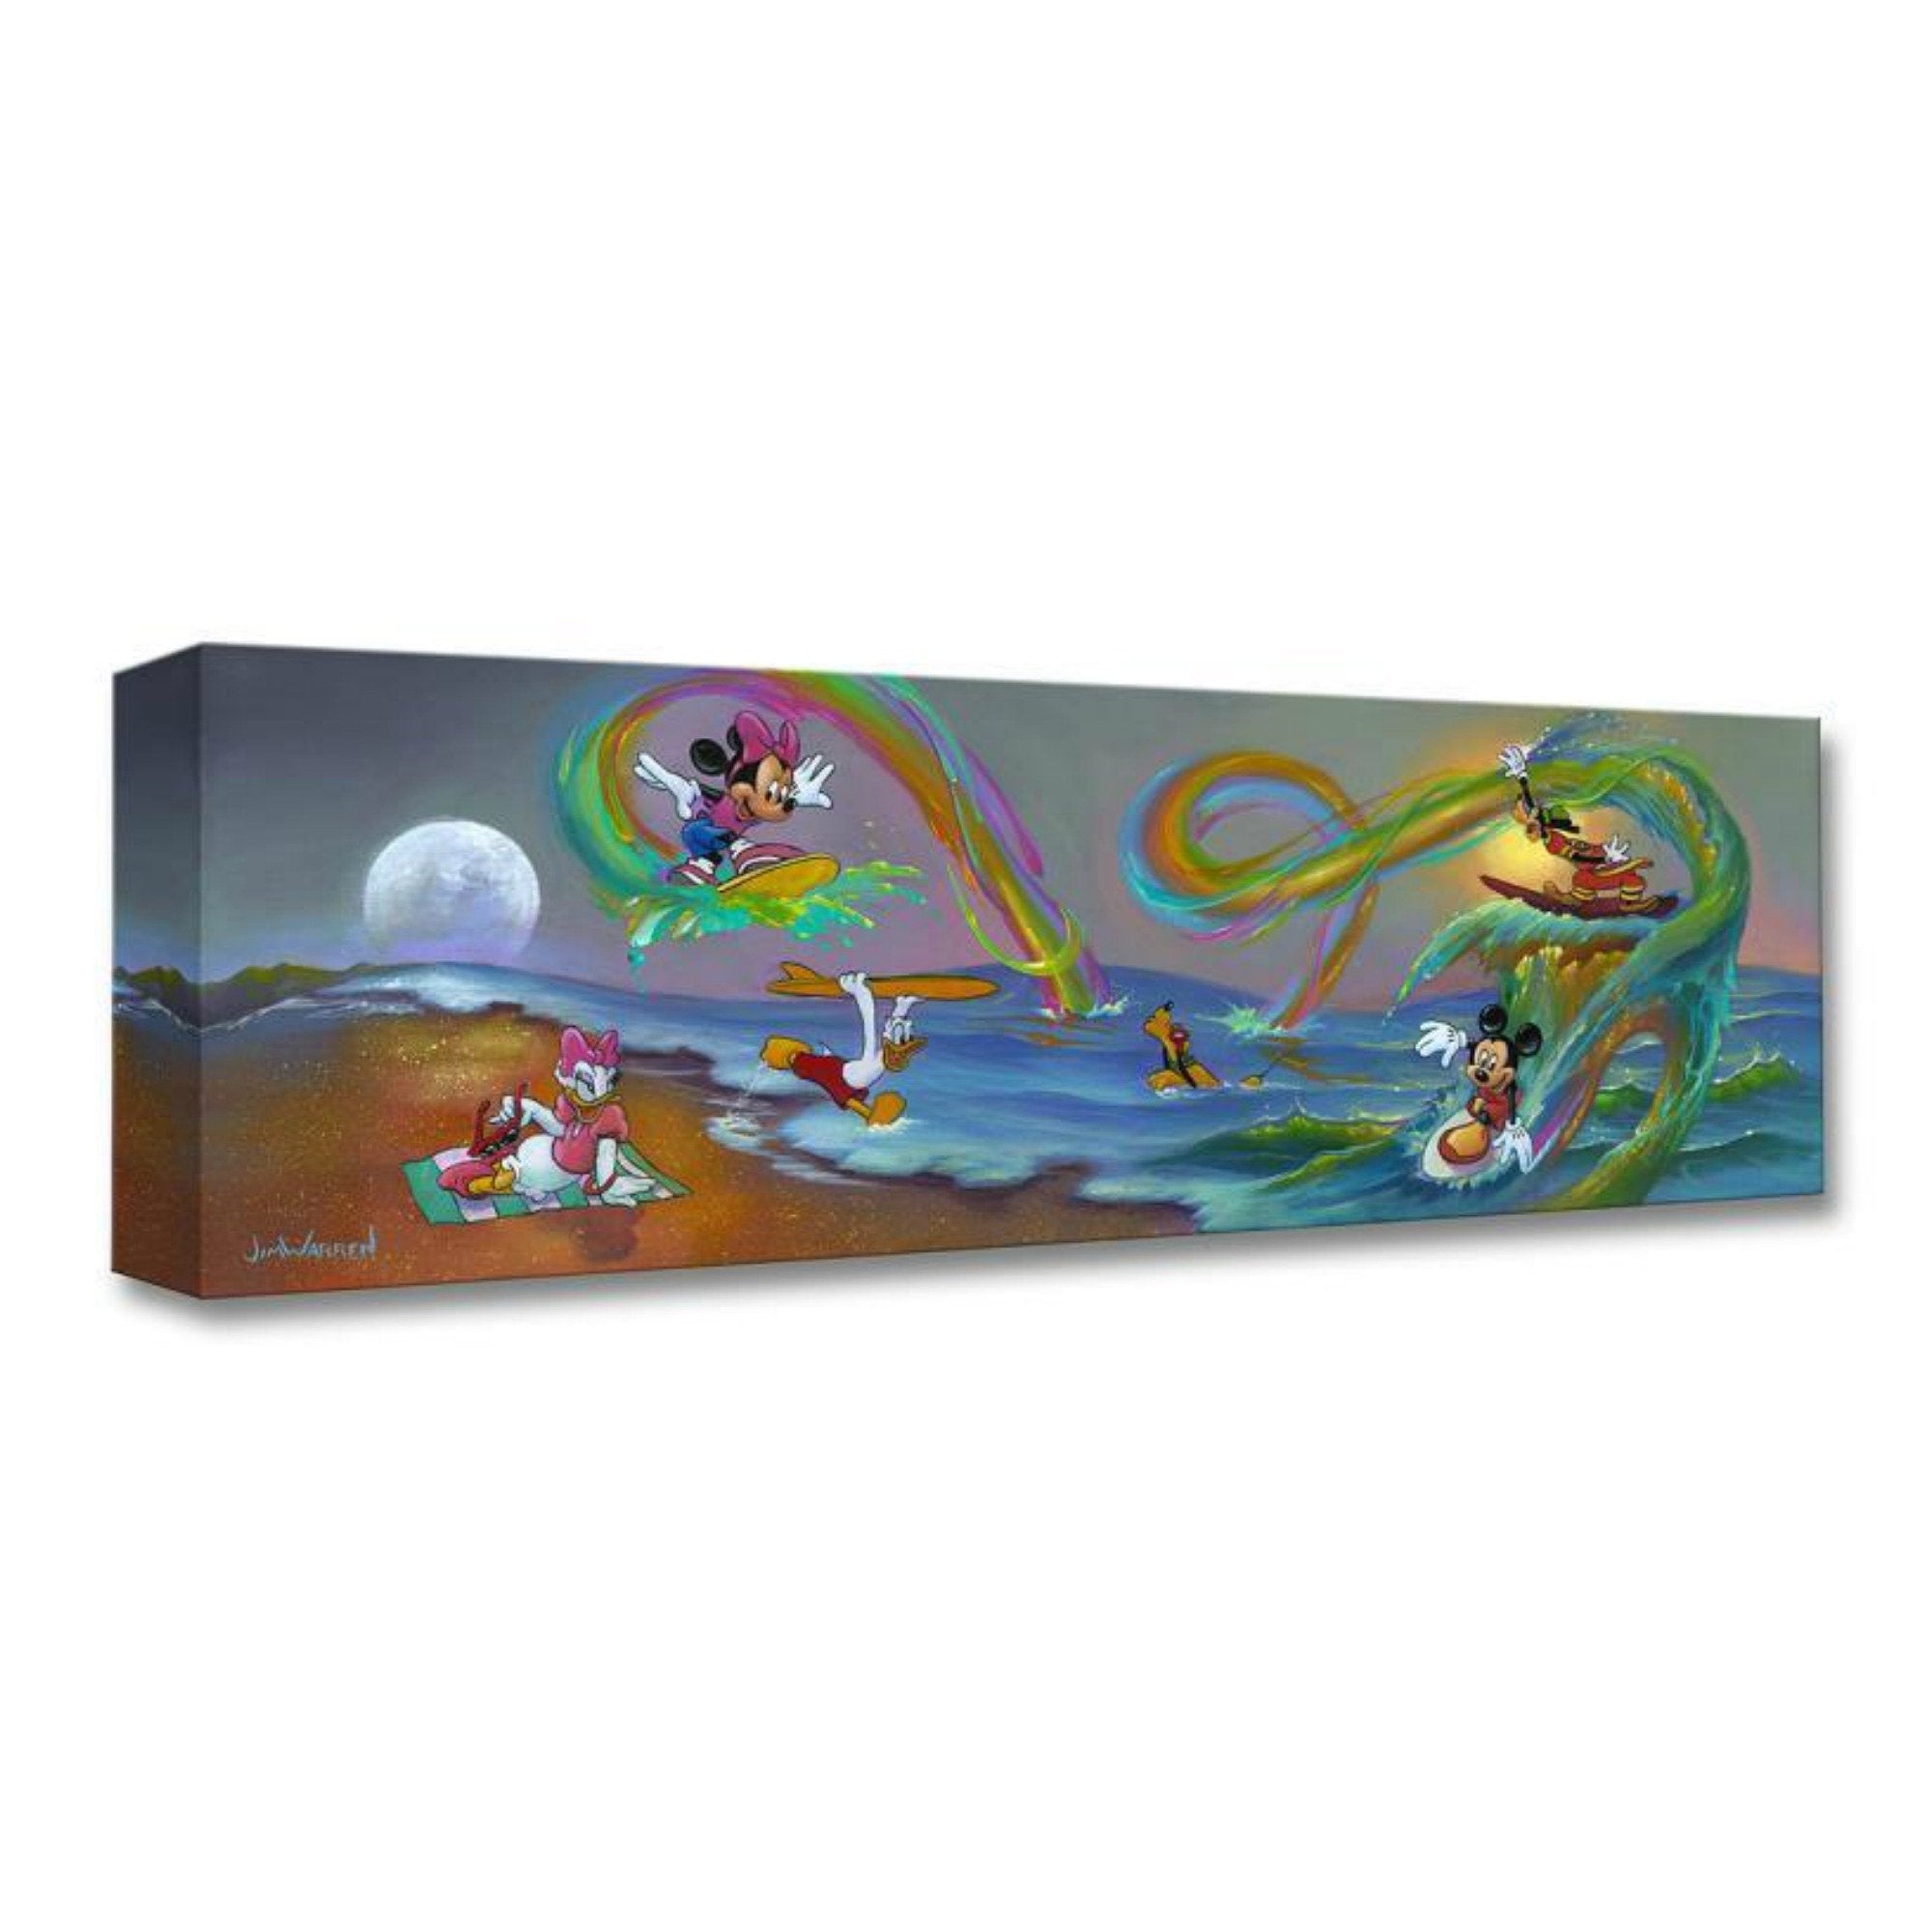 Mickey's Crazy Waves by Jim Warren  A day at the beach...Mickey, Minnie, and Goofy are having fun riding on crazy rainbow water waves, as Daisy, Donald play in the water.